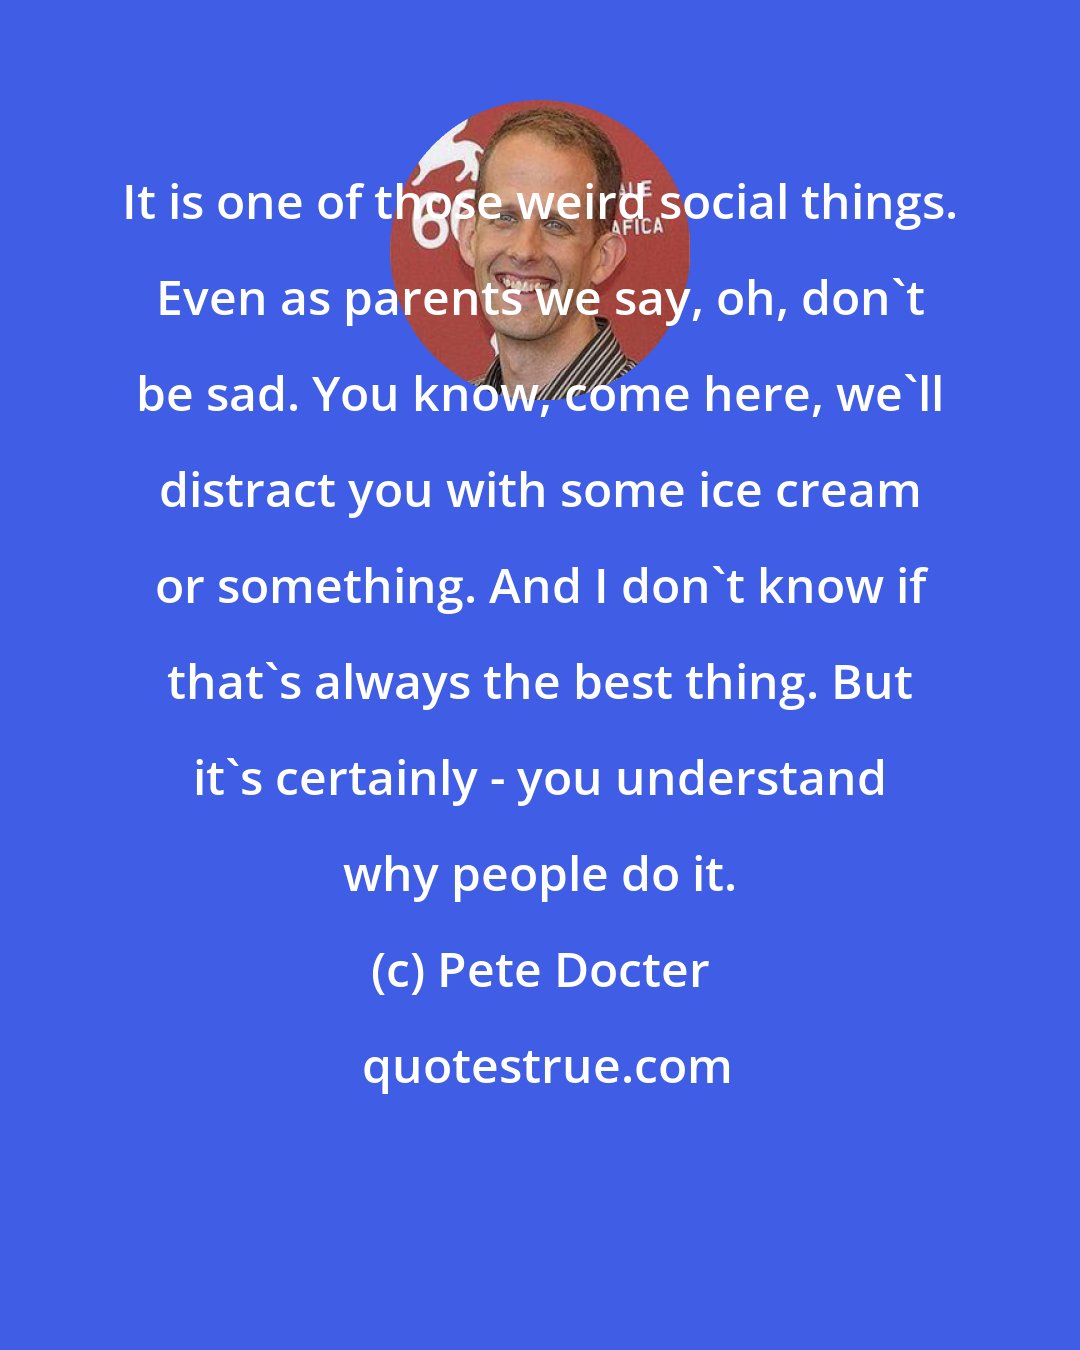 Pete Docter: It is one of those weird social things. Even as parents we say, oh, don't be sad. You know, come here, we'll distract you with some ice cream or something. And I don't know if that's always the best thing. But it's certainly - you understand why people do it.